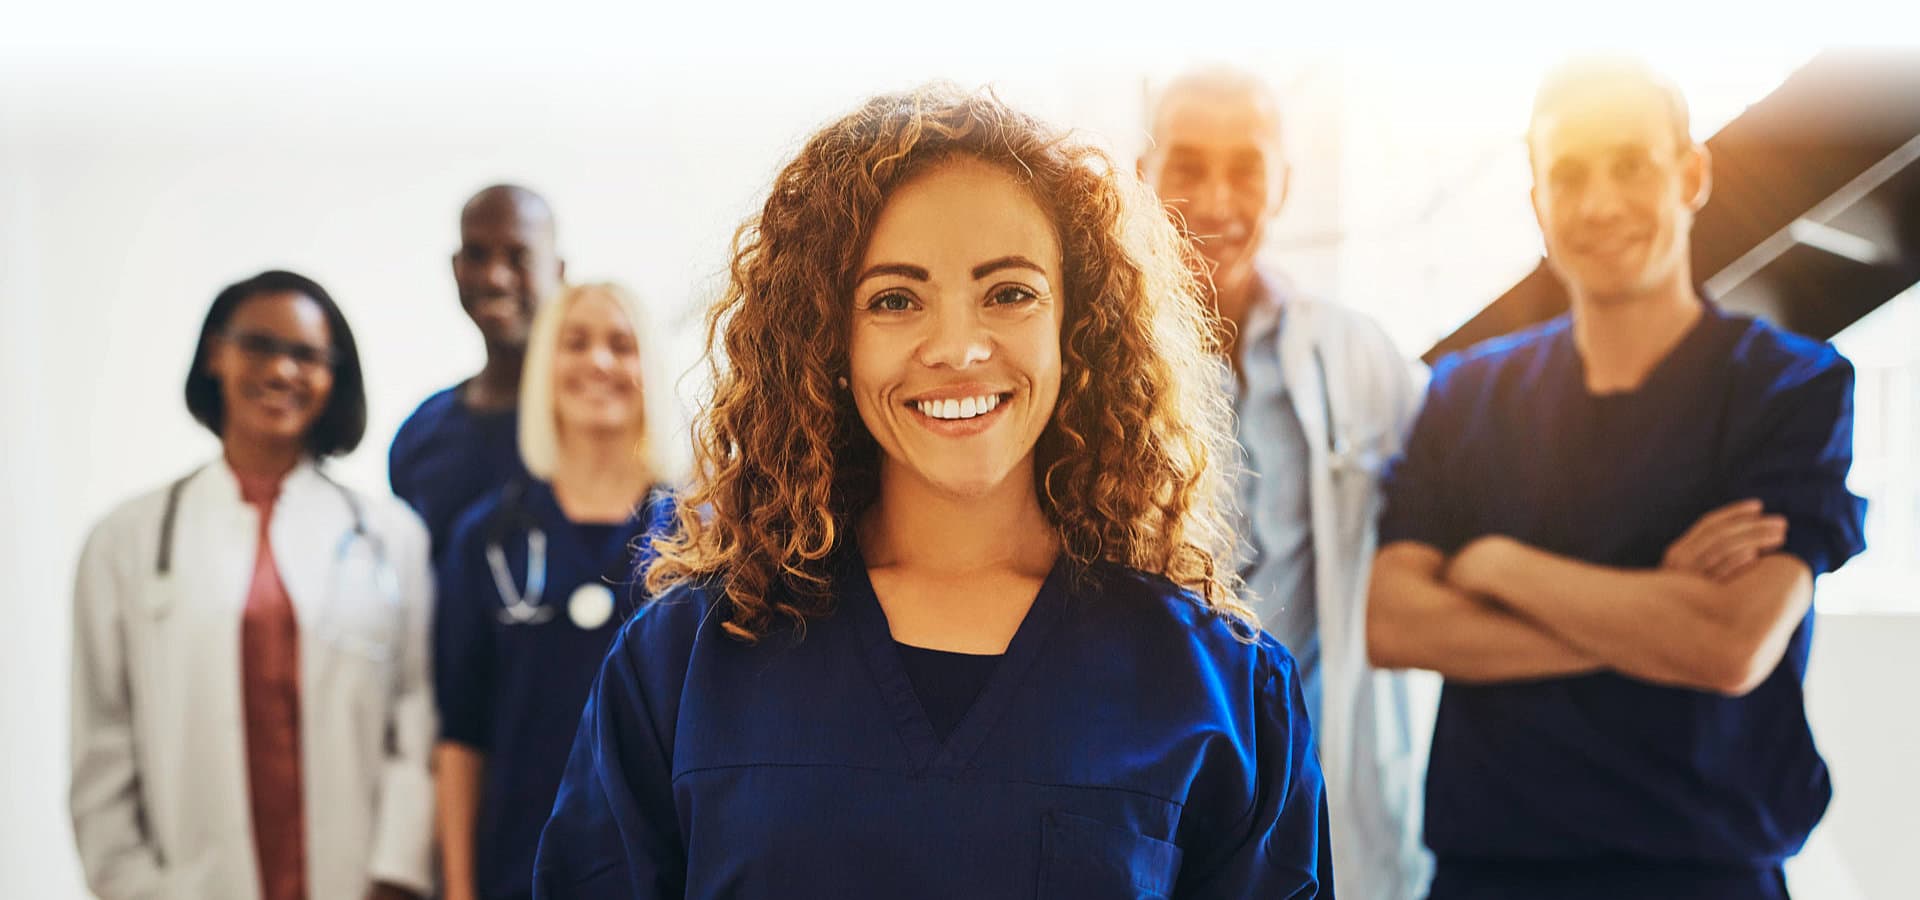 group of medical healthcare smiling